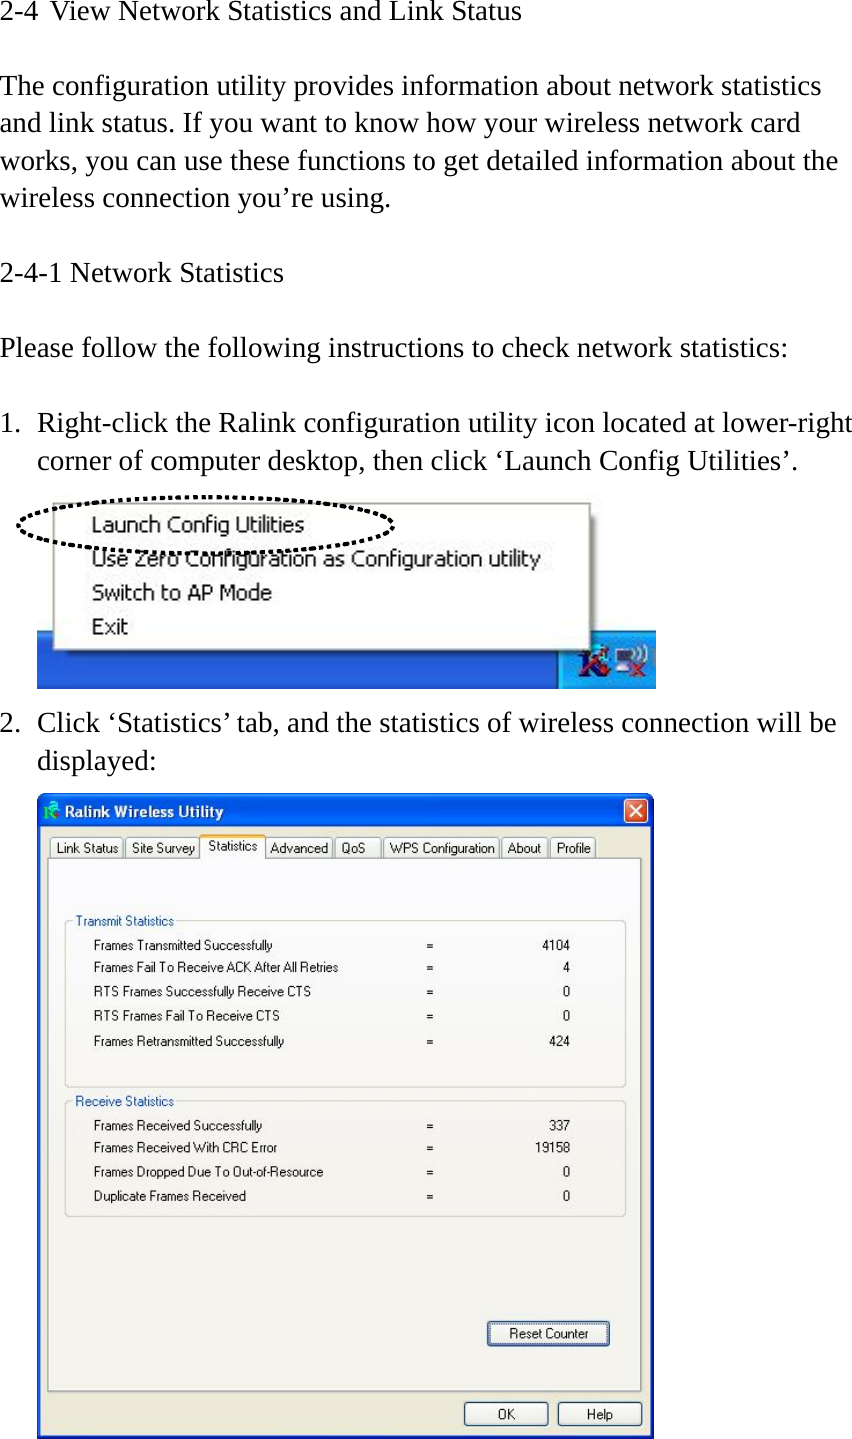 2-4 View Network Statistics and Link Status  The configuration utility provides information about network statistics and link status. If you want to know how your wireless network card works, you can use these functions to get detailed information about the wireless connection you’re using.  2-4-1 Network Statistics  Please follow the following instructions to check network statistics:  1. Right-click the Ralink configuration utility icon located at lower-right corner of computer desktop, then click ‘Launch Config Utilities’.  2. Click ‘Statistics’ tab, and the statistics of wireless connection will be displayed:  